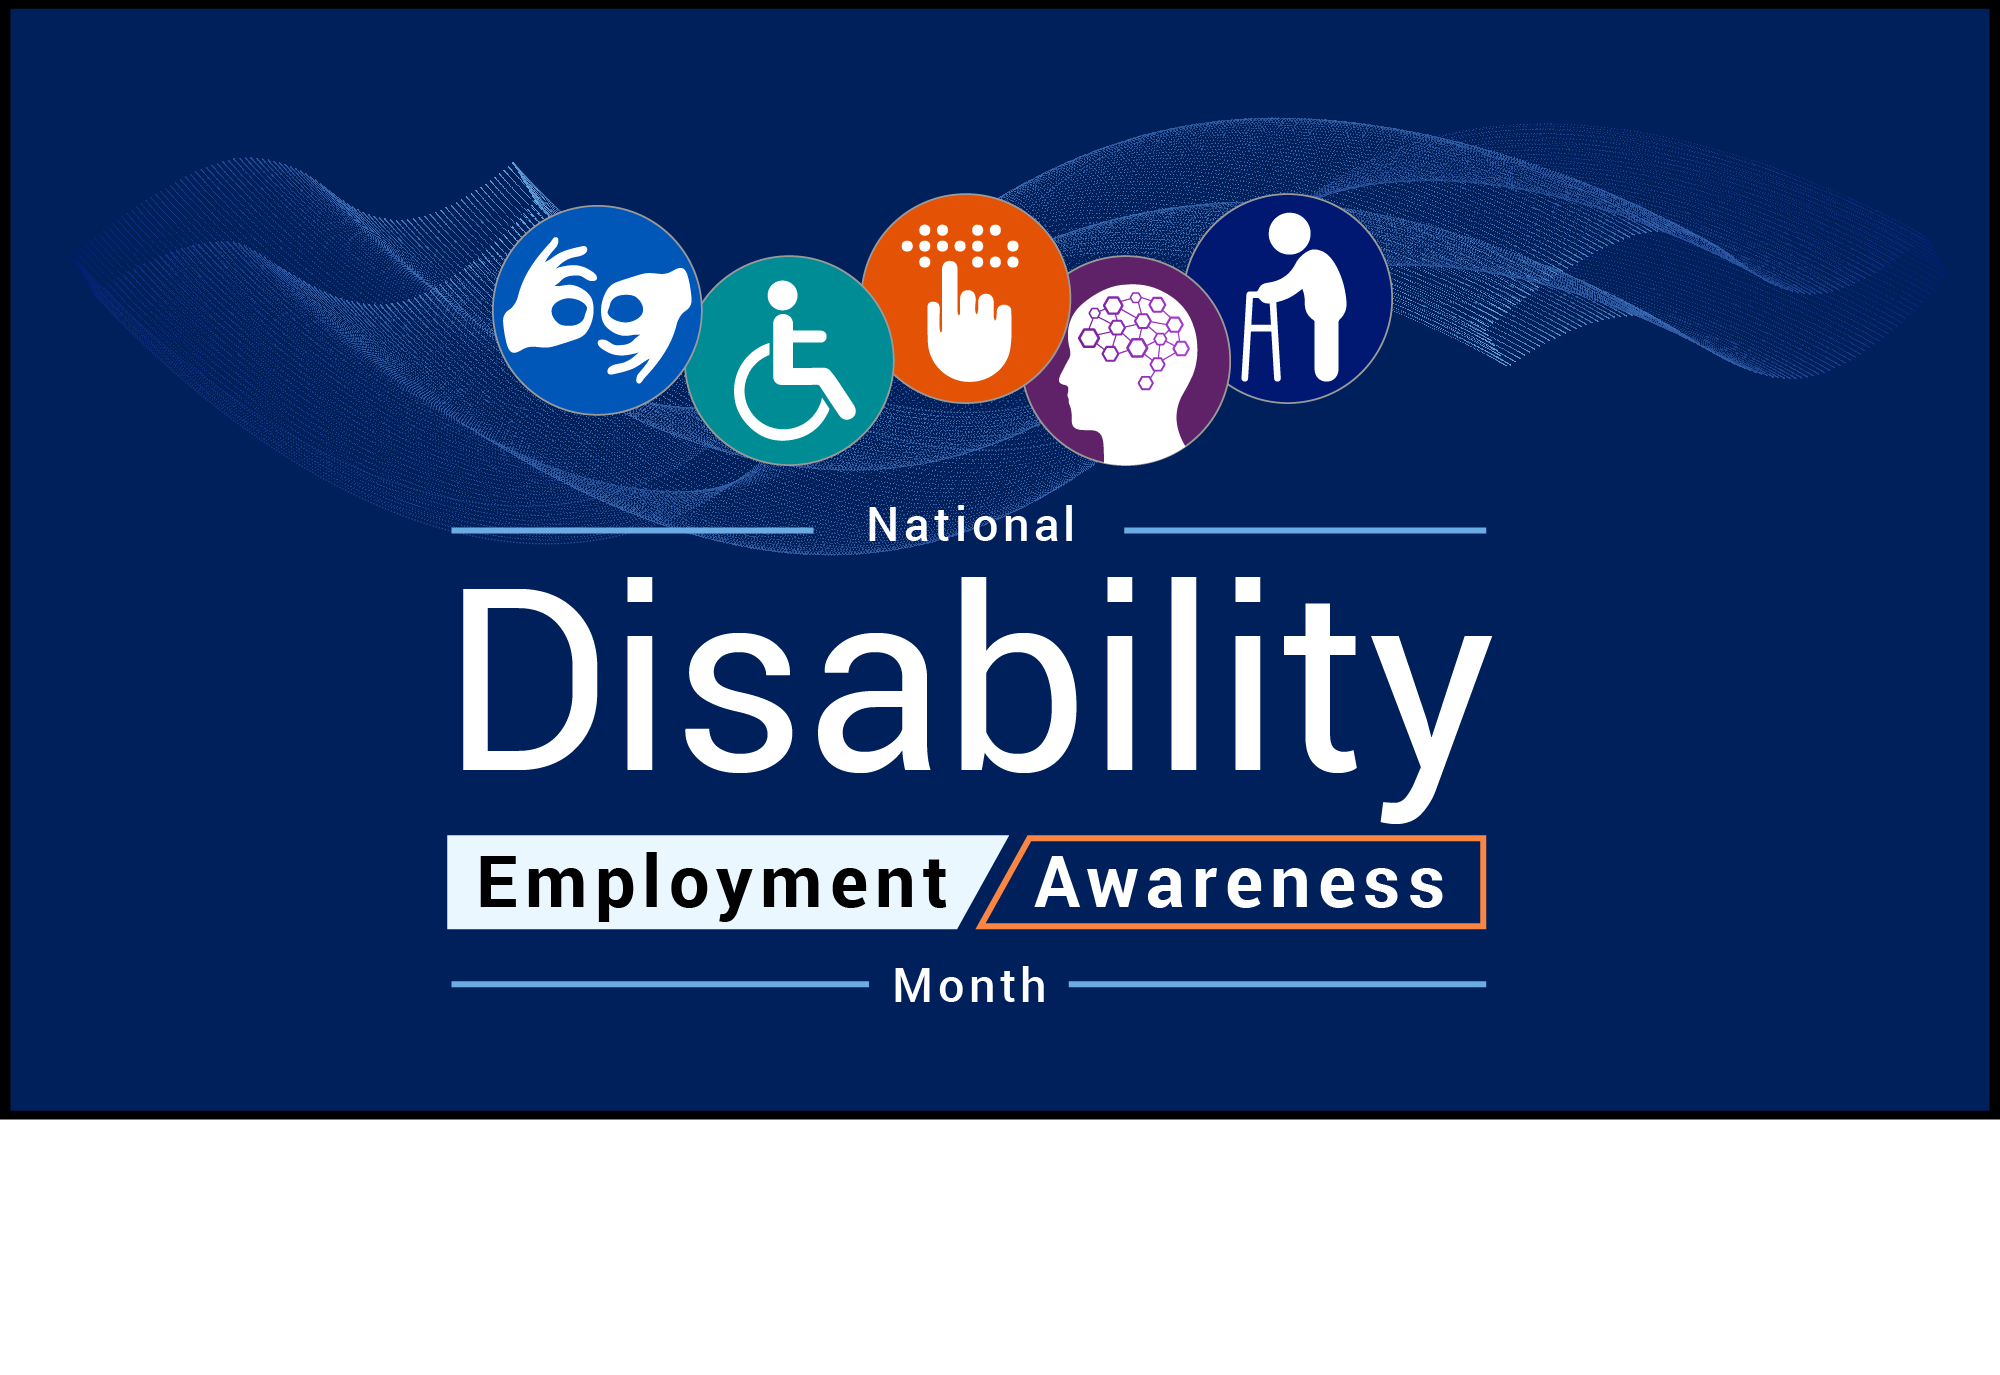 National Disability Employment Awareness Month with icons representing various disabilities